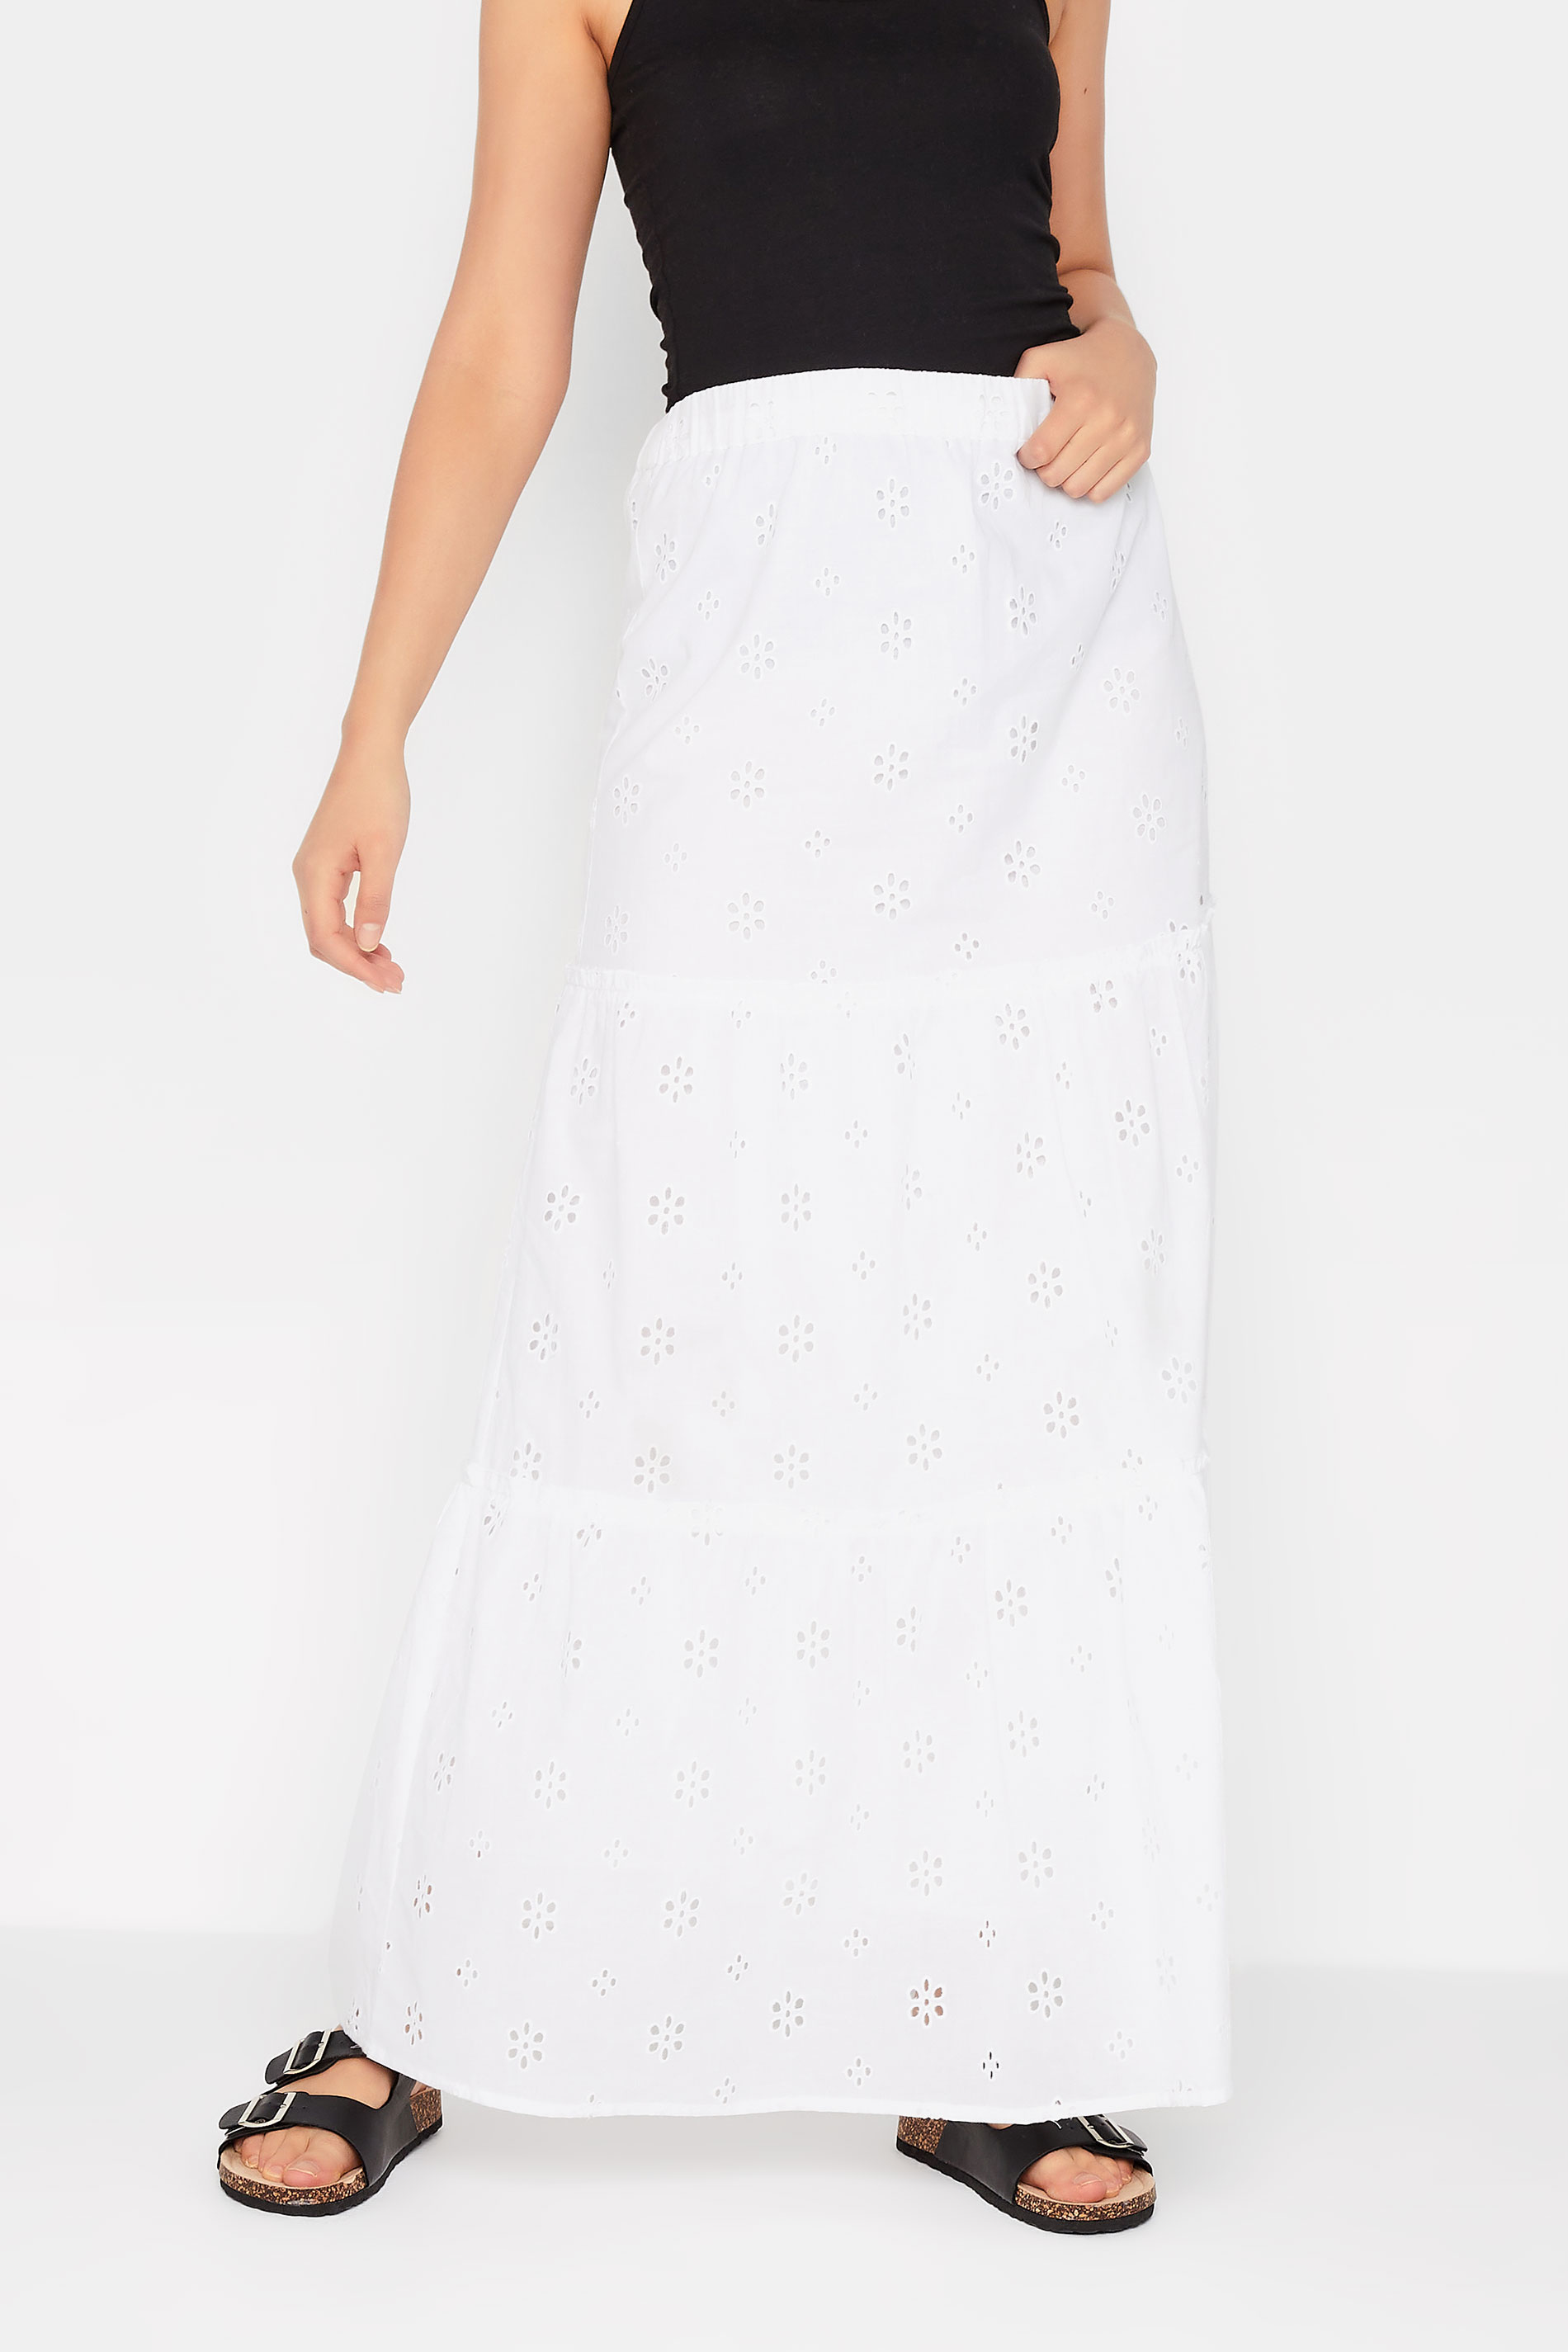 LTS Tall Women's White Broderie Anglaise Tiered Maxi Skirt | Long Tall Sally 1